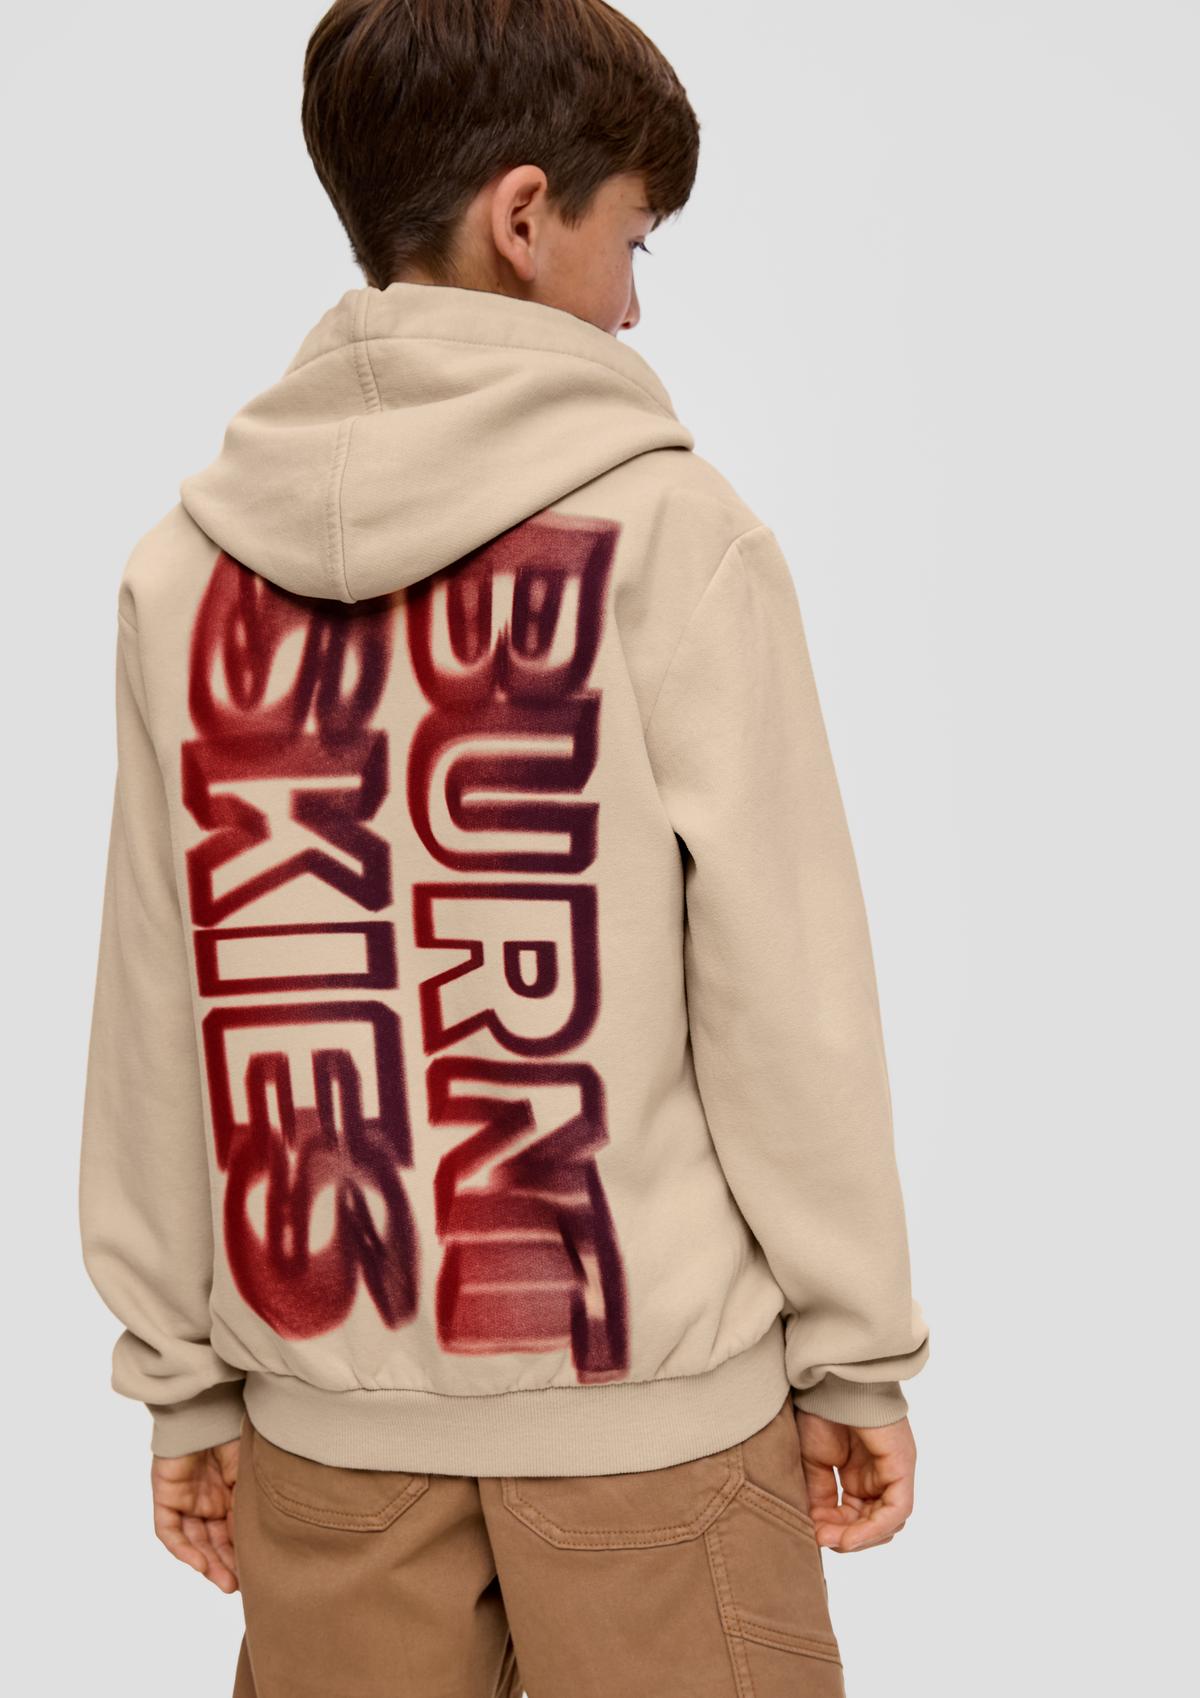 Hooded sweatshirt with a back print